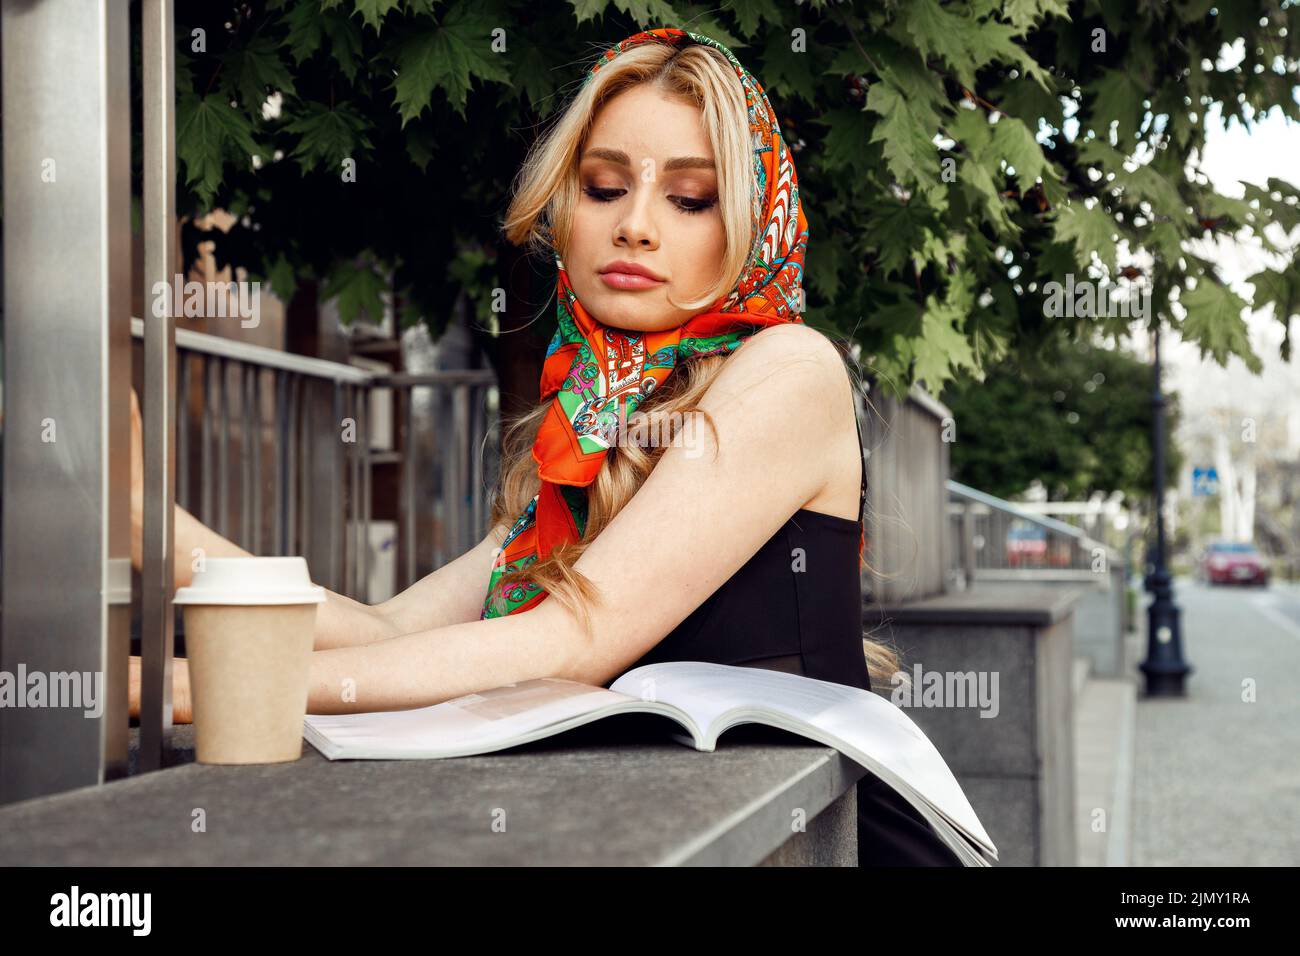 Romantic girl with bright makeup in stylish colorful headscarf looking down and reading magazine with glass of coffee in morning closeup. Paris style Stock Photo